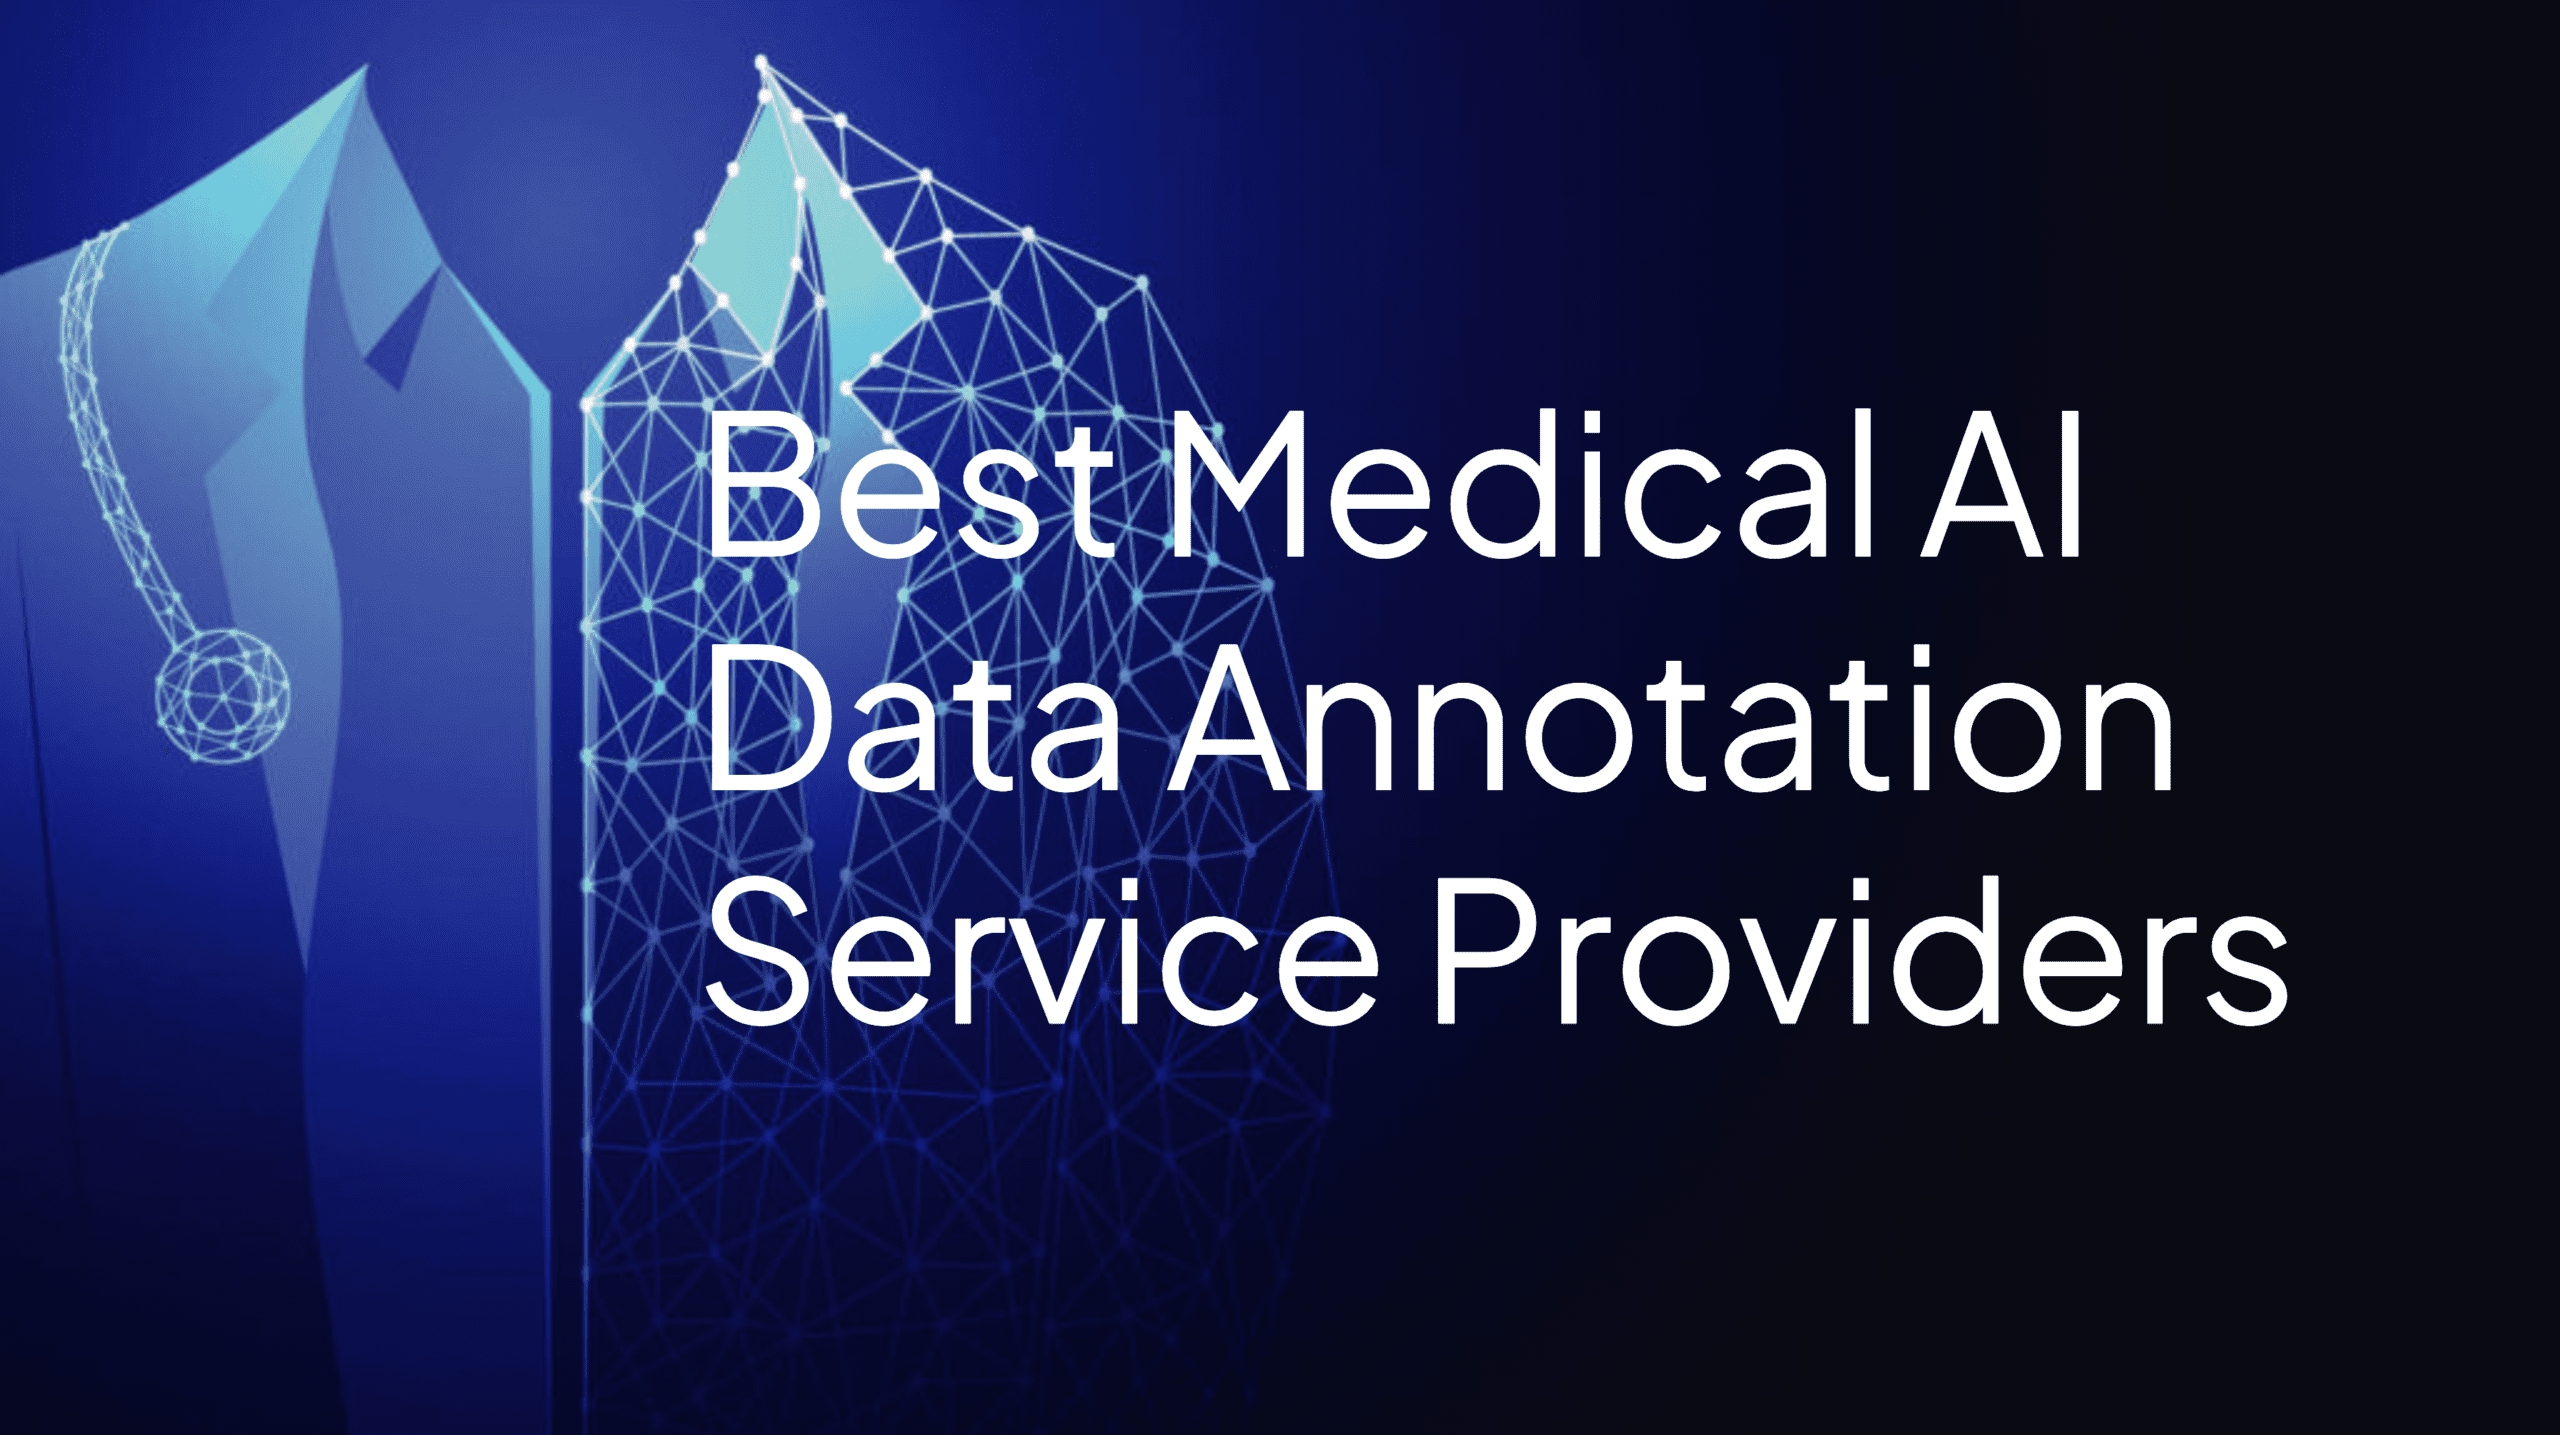 Best Medical AI Data Annotation Service Providers